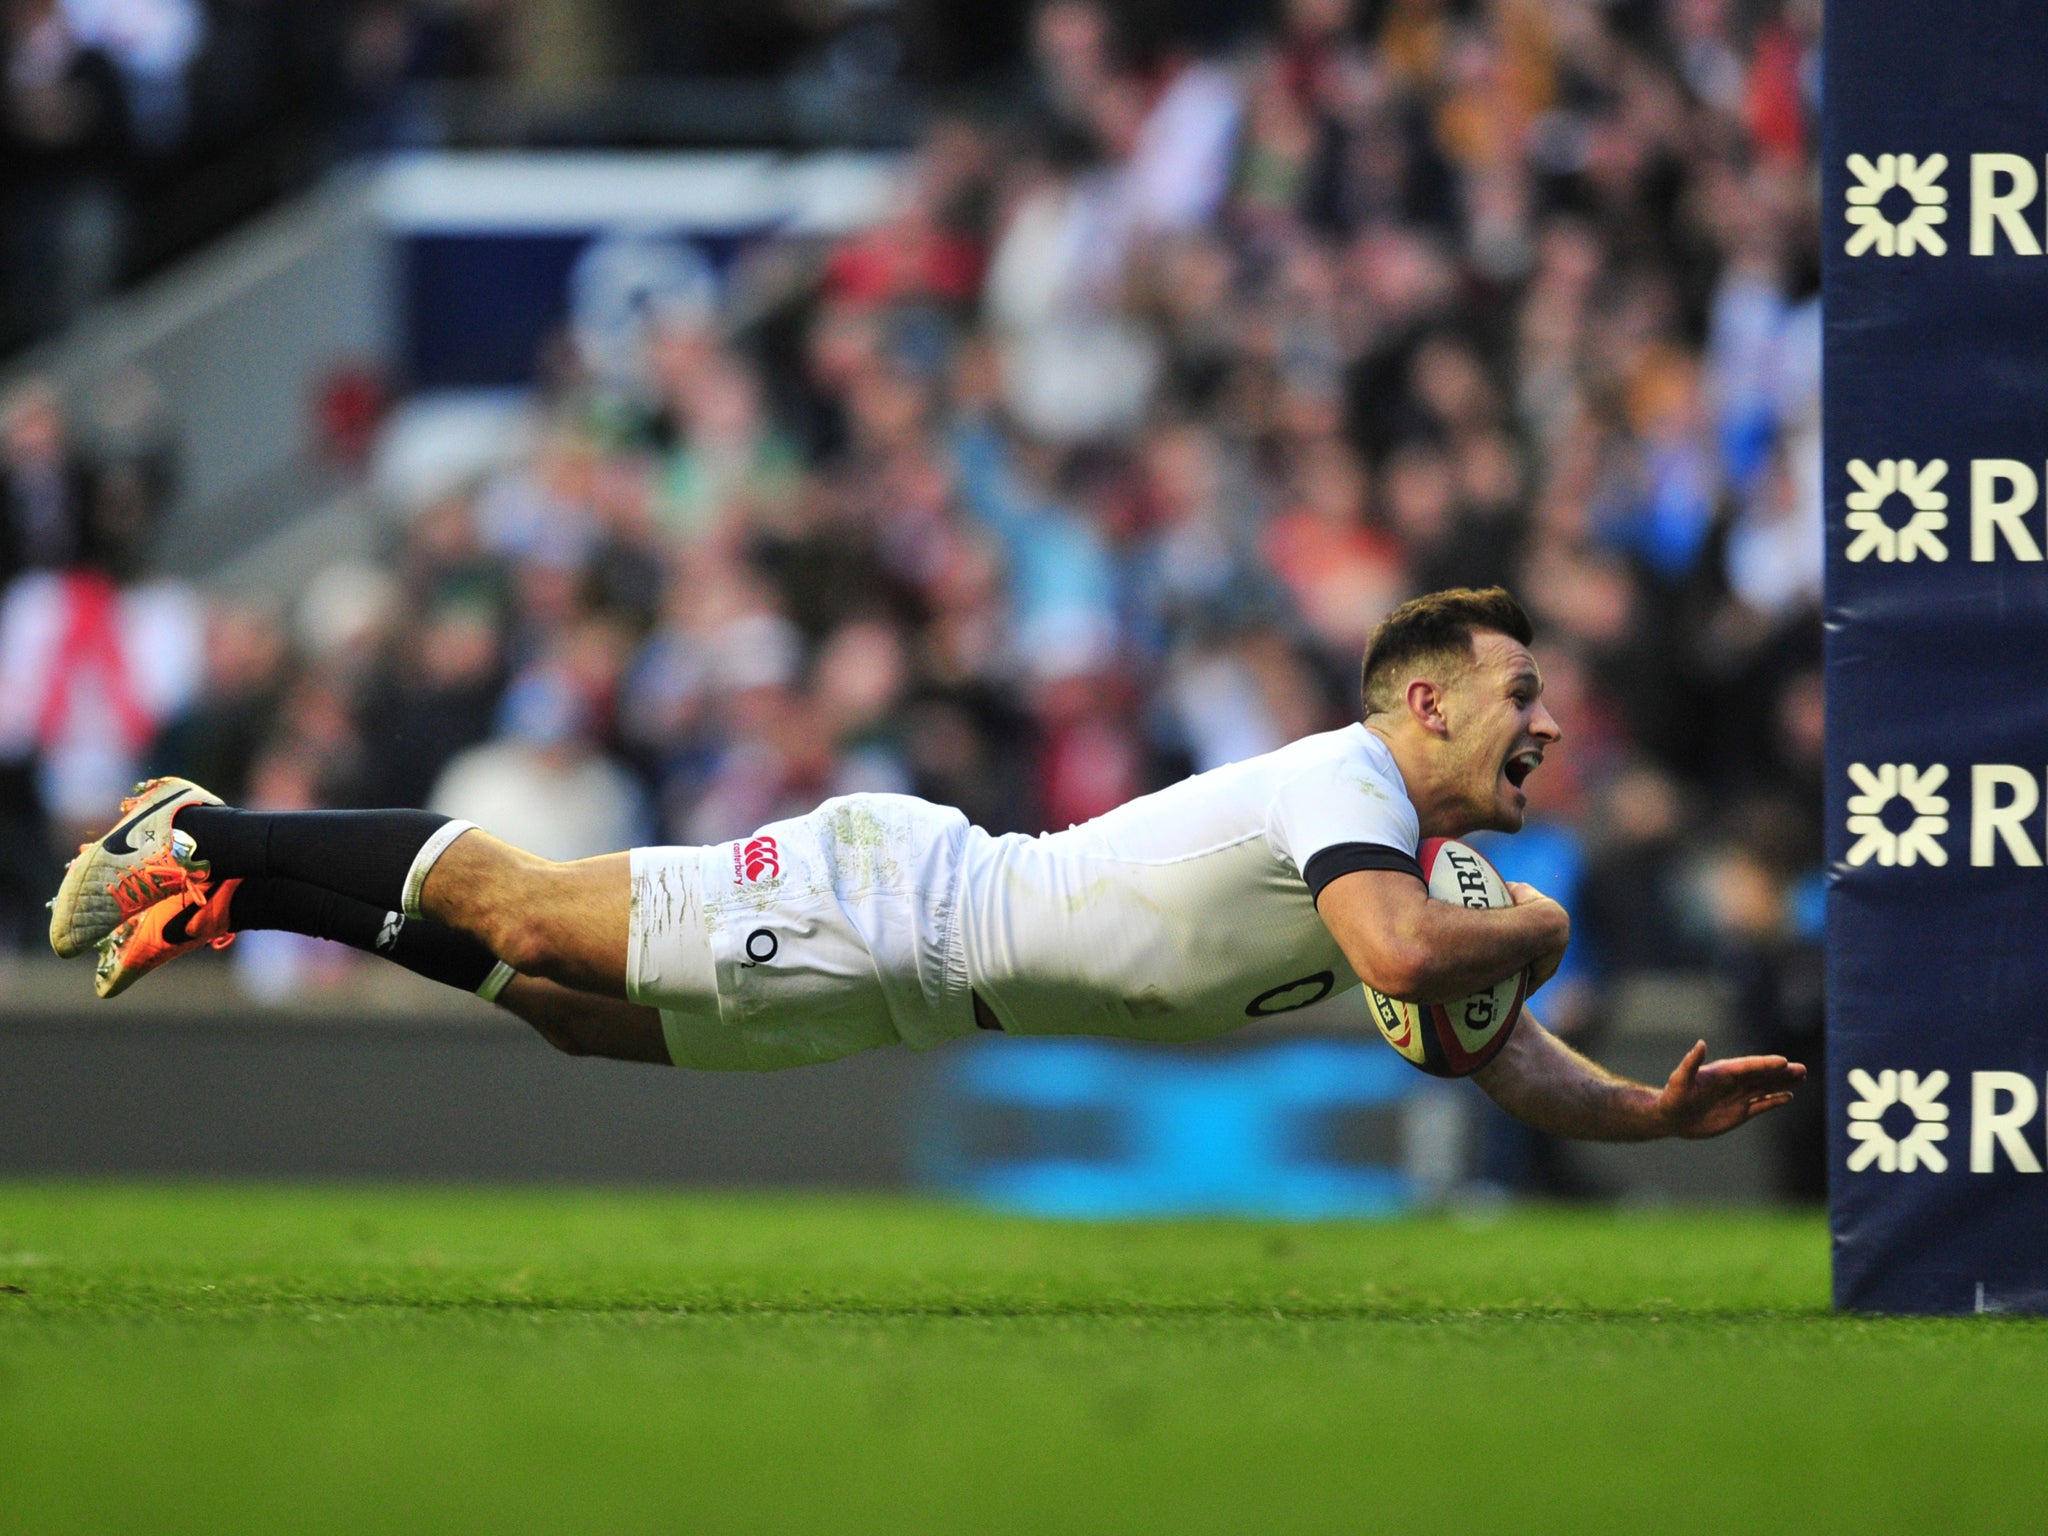 Danny Care scores the match-winning try for England in their 13-10 victory over Ireland